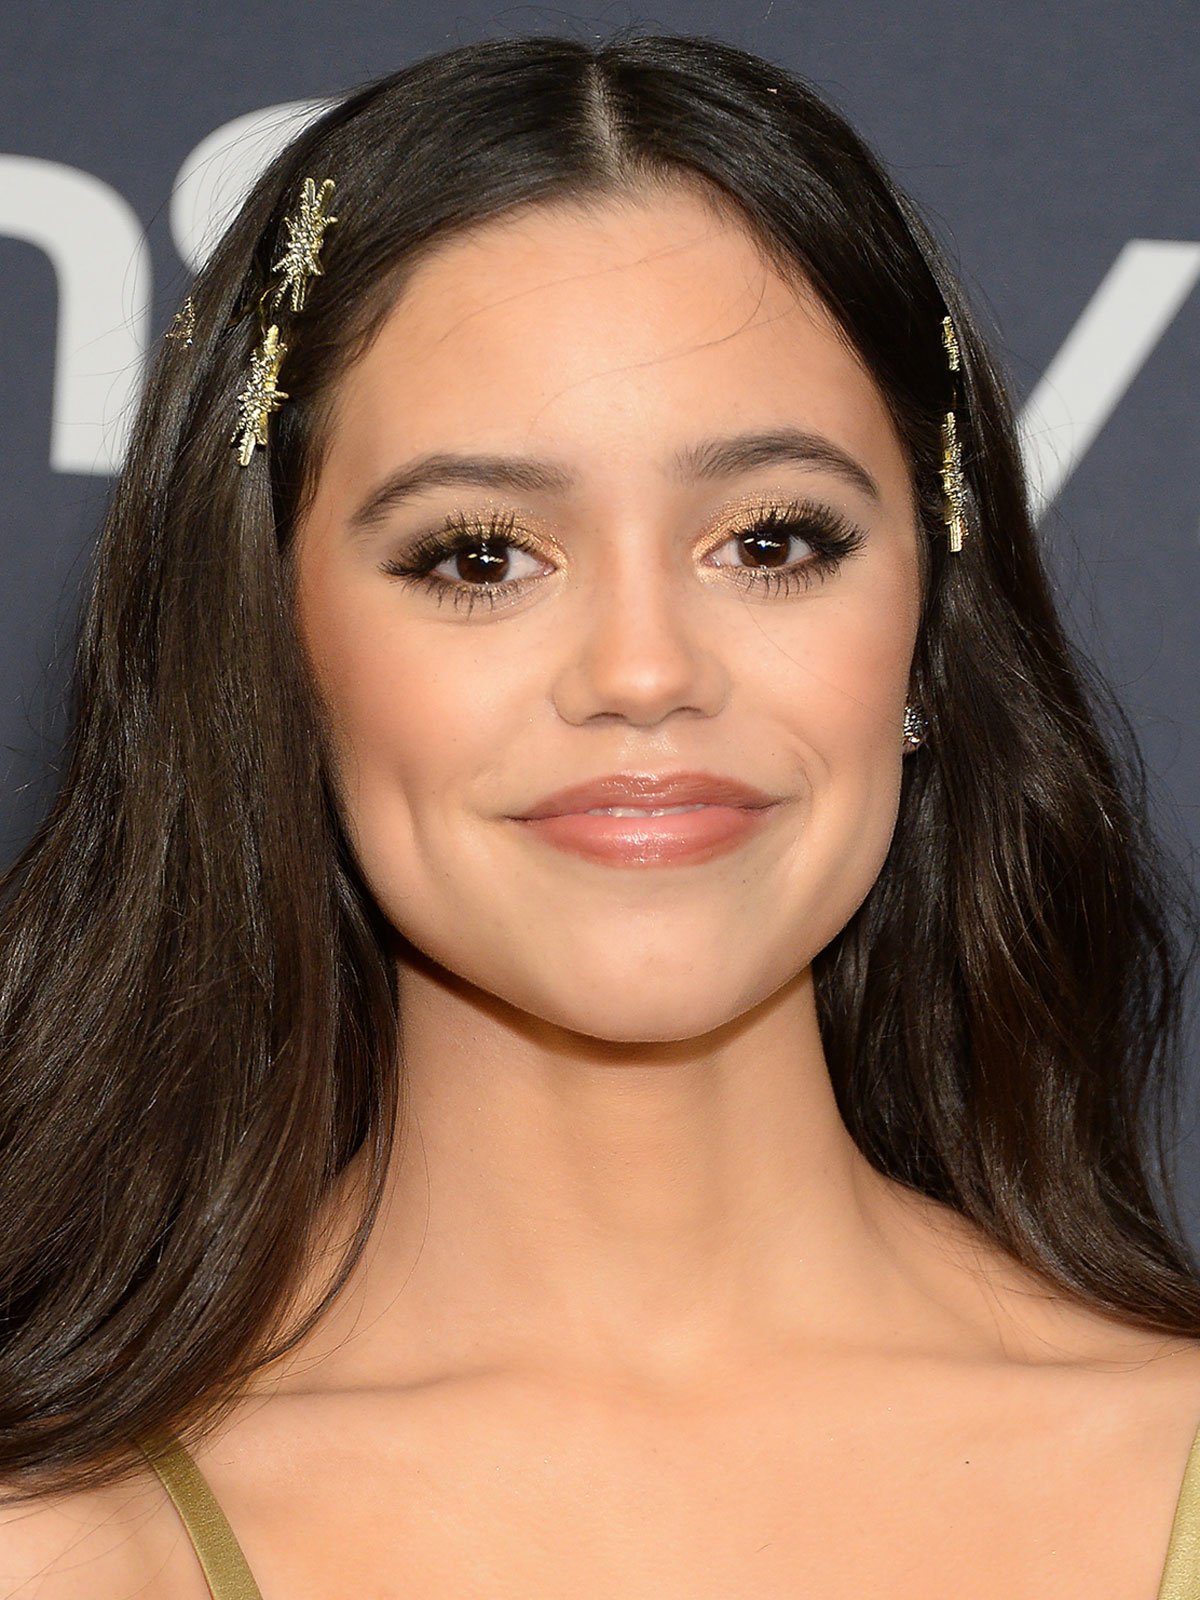 How Old Is Jenna Ortega Jenna Ortega 10 Facts About The You Star ...